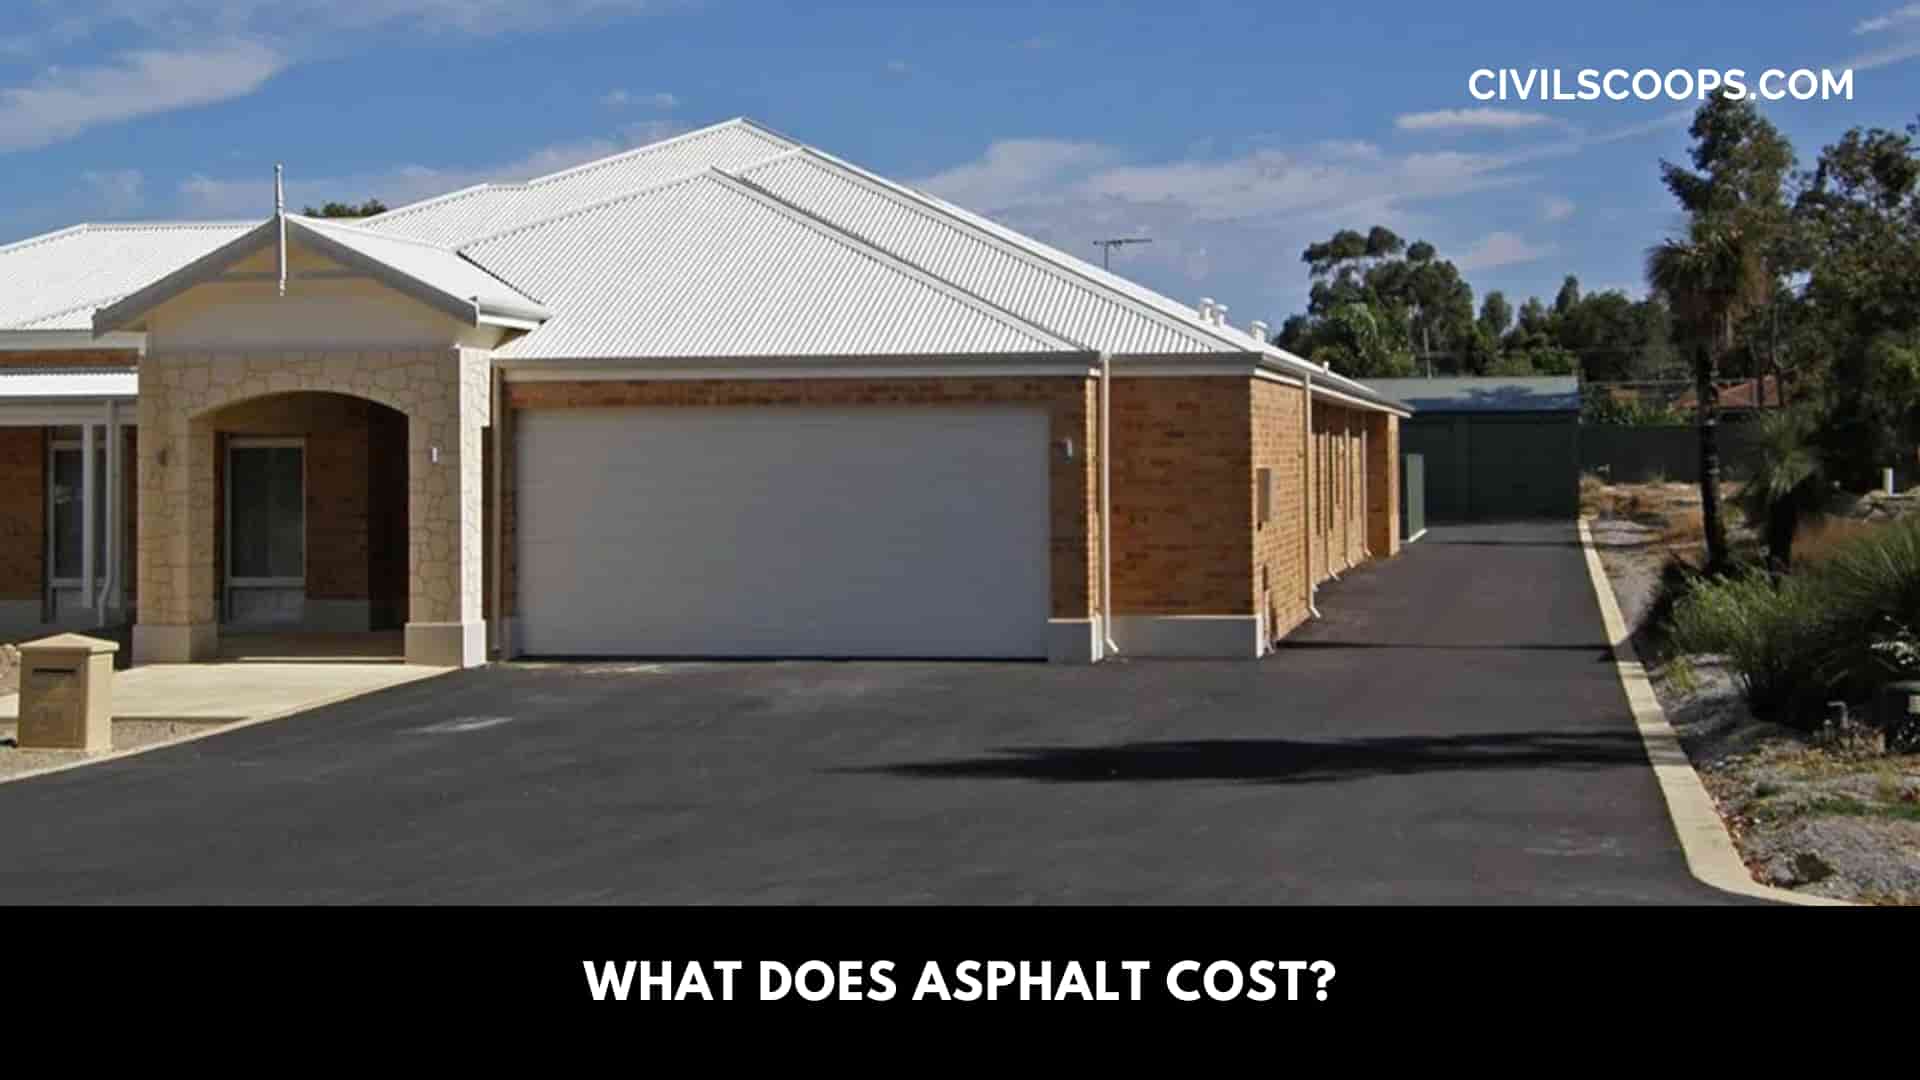 What Does Asphalt Cost?